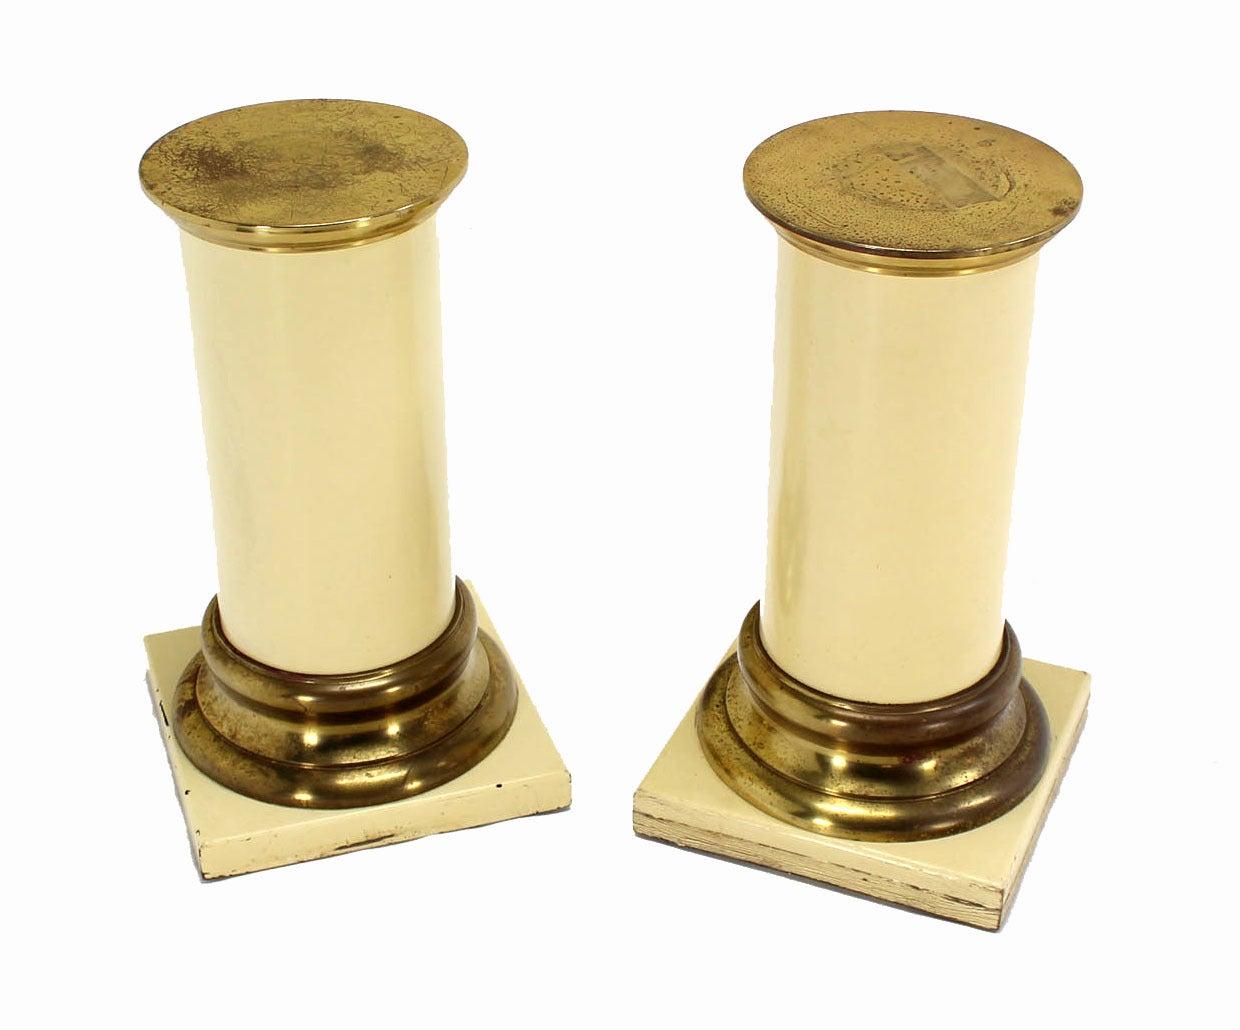 Pair Brass and White Beige Lacquered Wood Round Pedestals Table Bases Stands.
Full price included complete restoration to a desired color of finish and polishing of the brass elements.